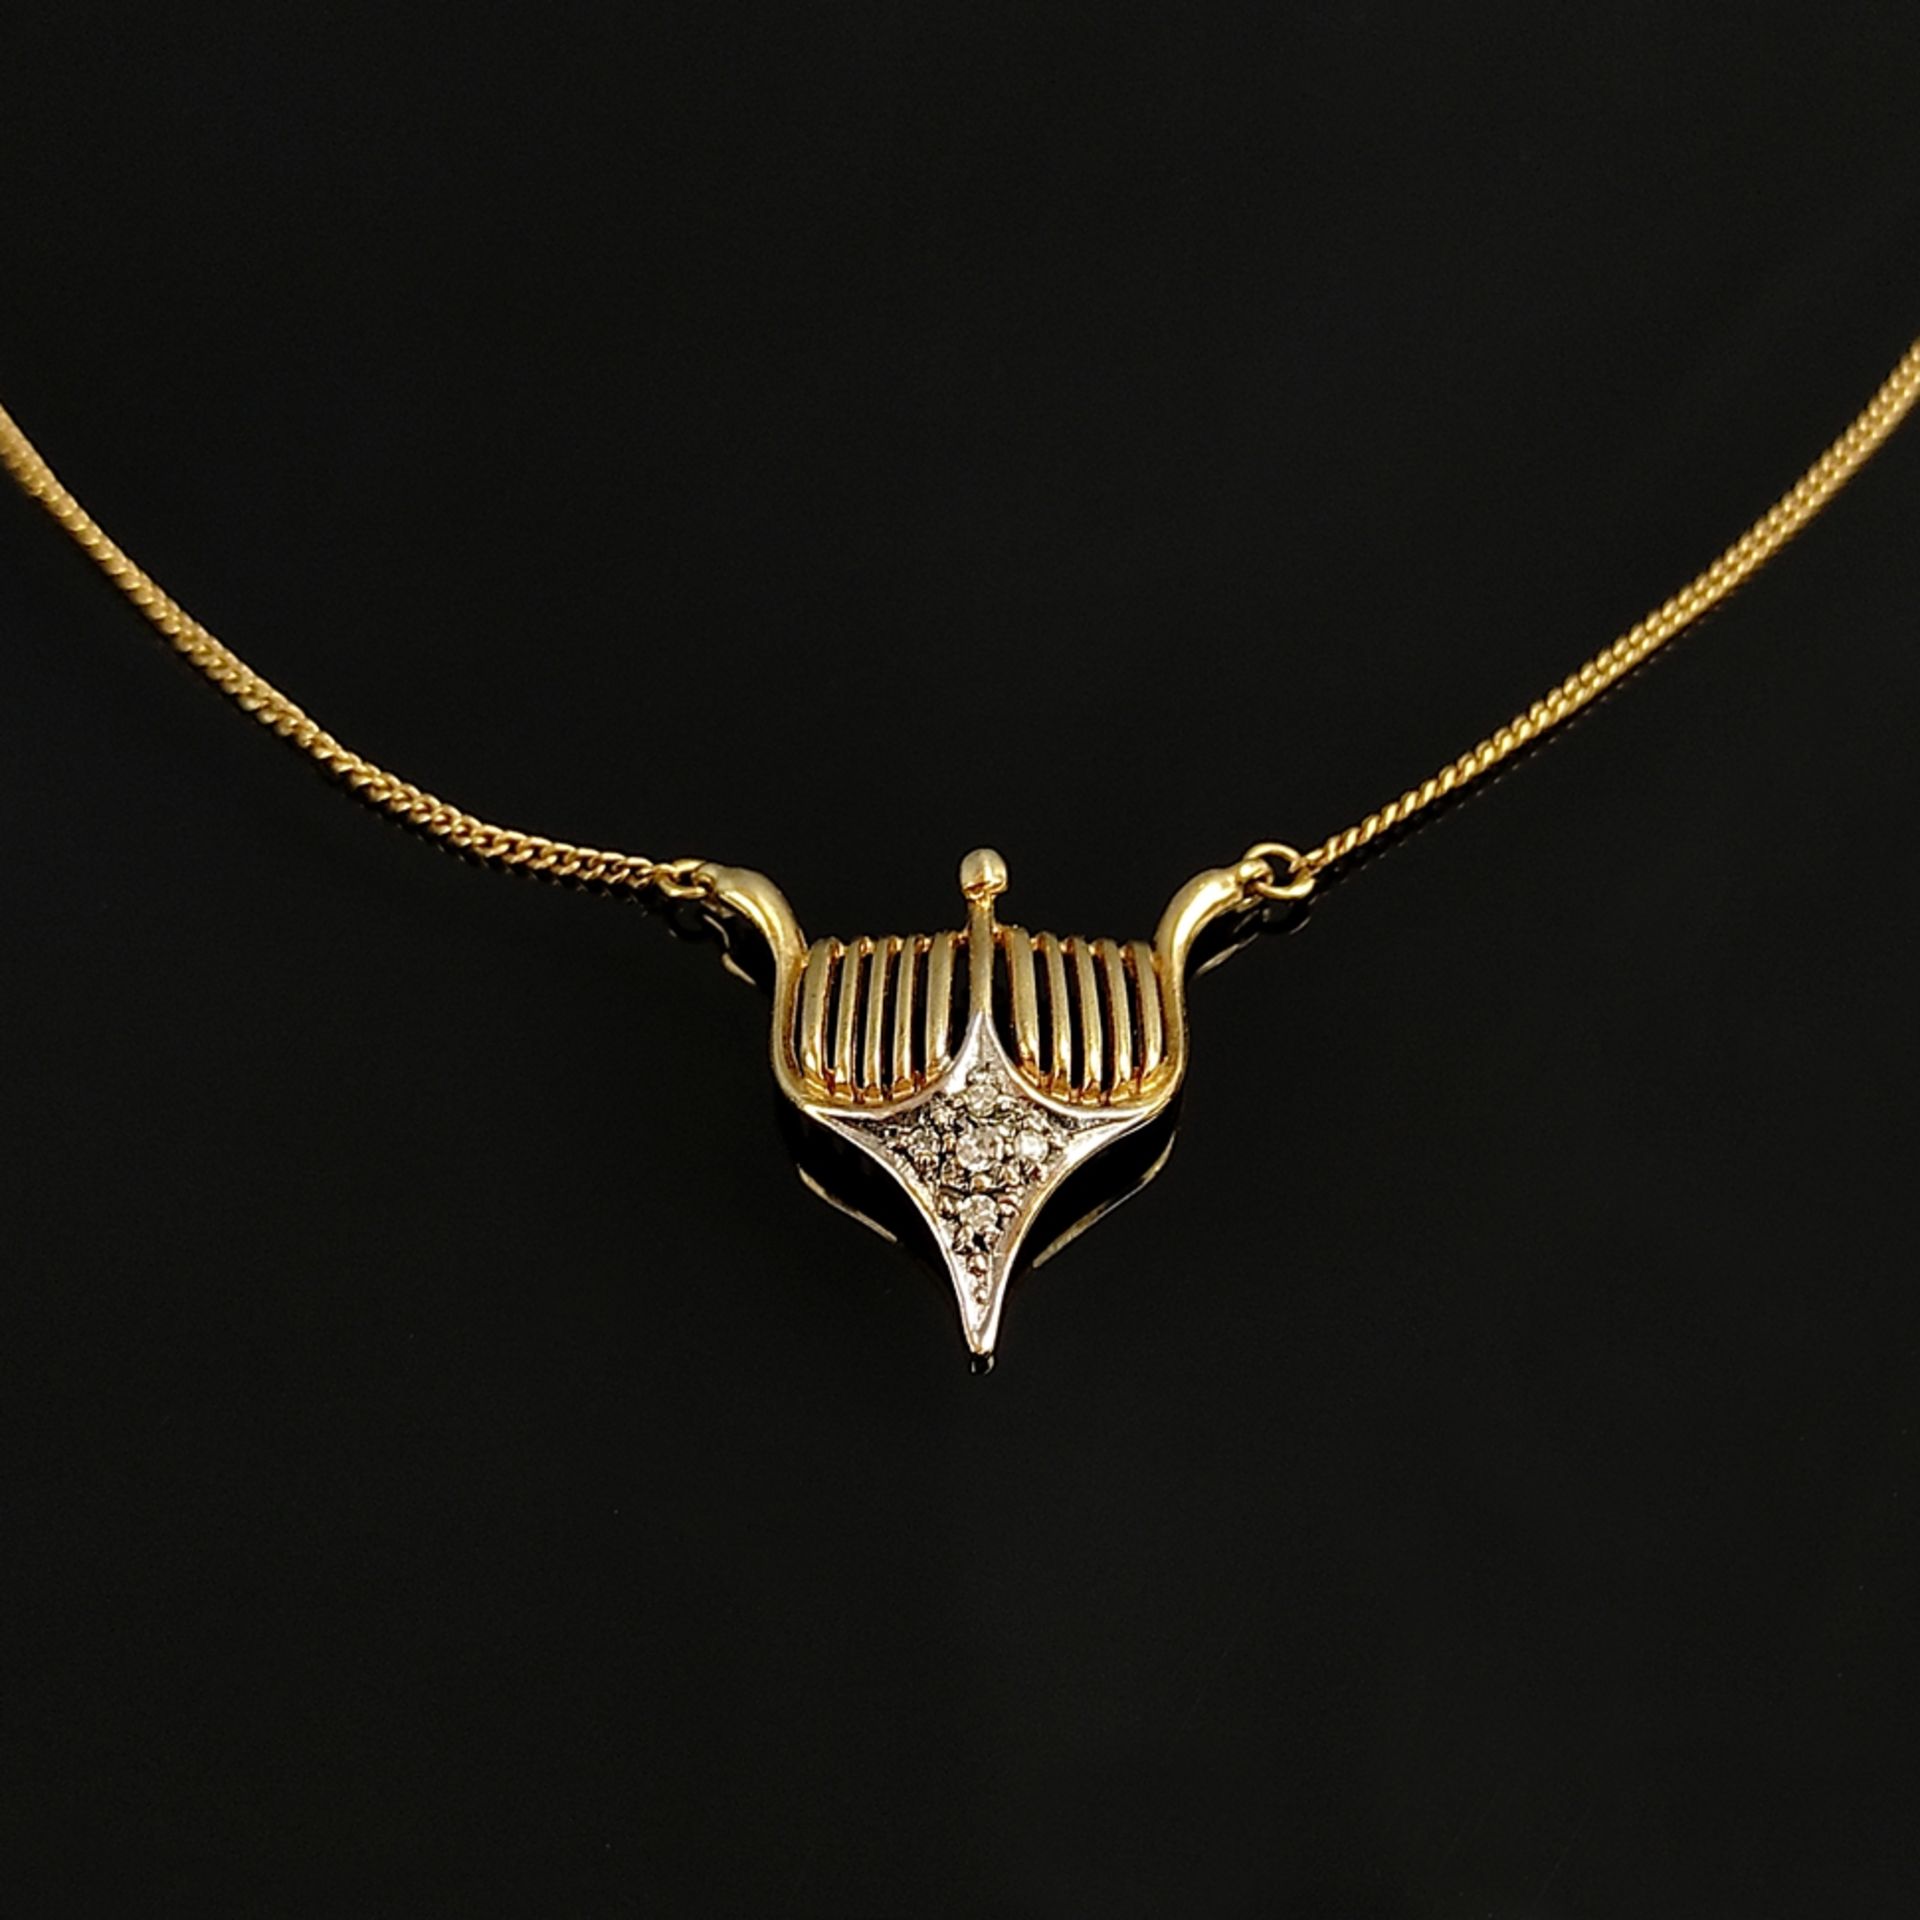 Extravagant necklace, 333/8K white/yellow gold, 3g, centre element set with 5 small diamonds, ring 